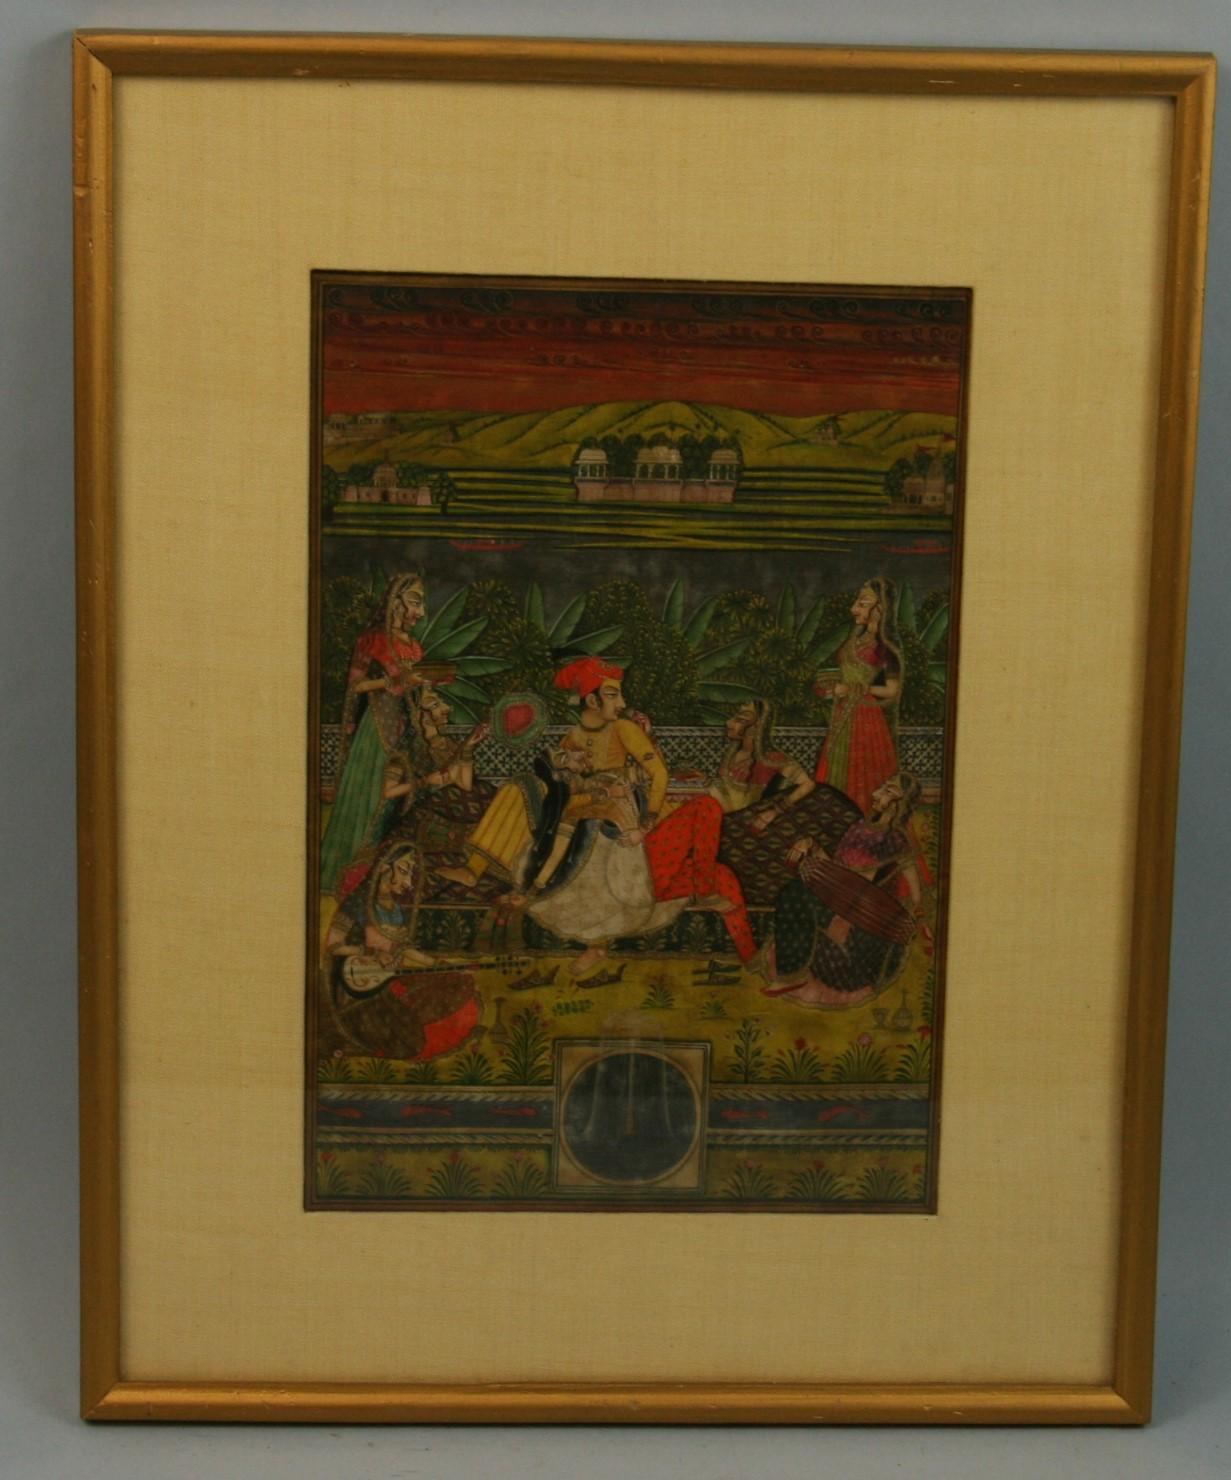 5031. Antique gouache Indian painting on paper
Image size 9x6